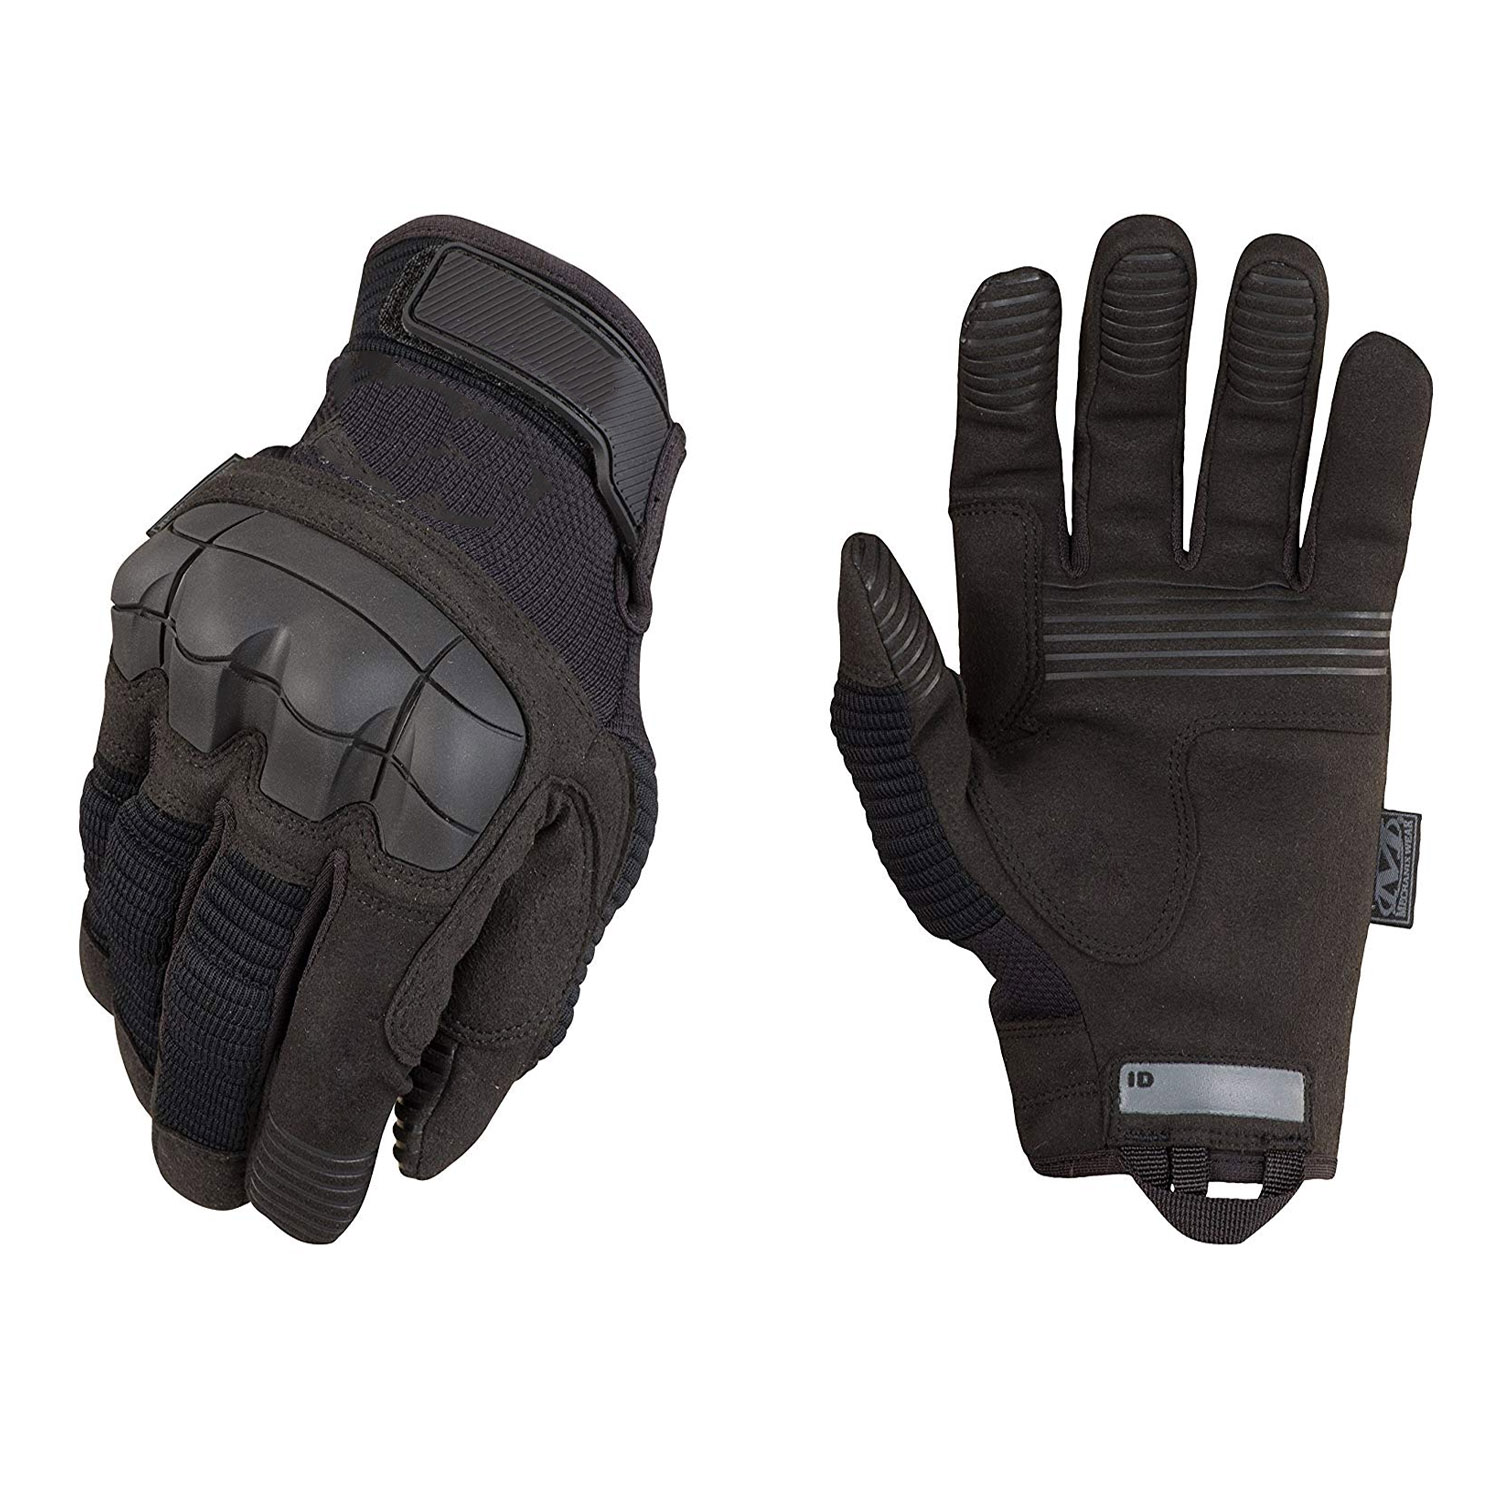 Durable cut resistant knucke protective synthetic leather safety mechanic work gloves